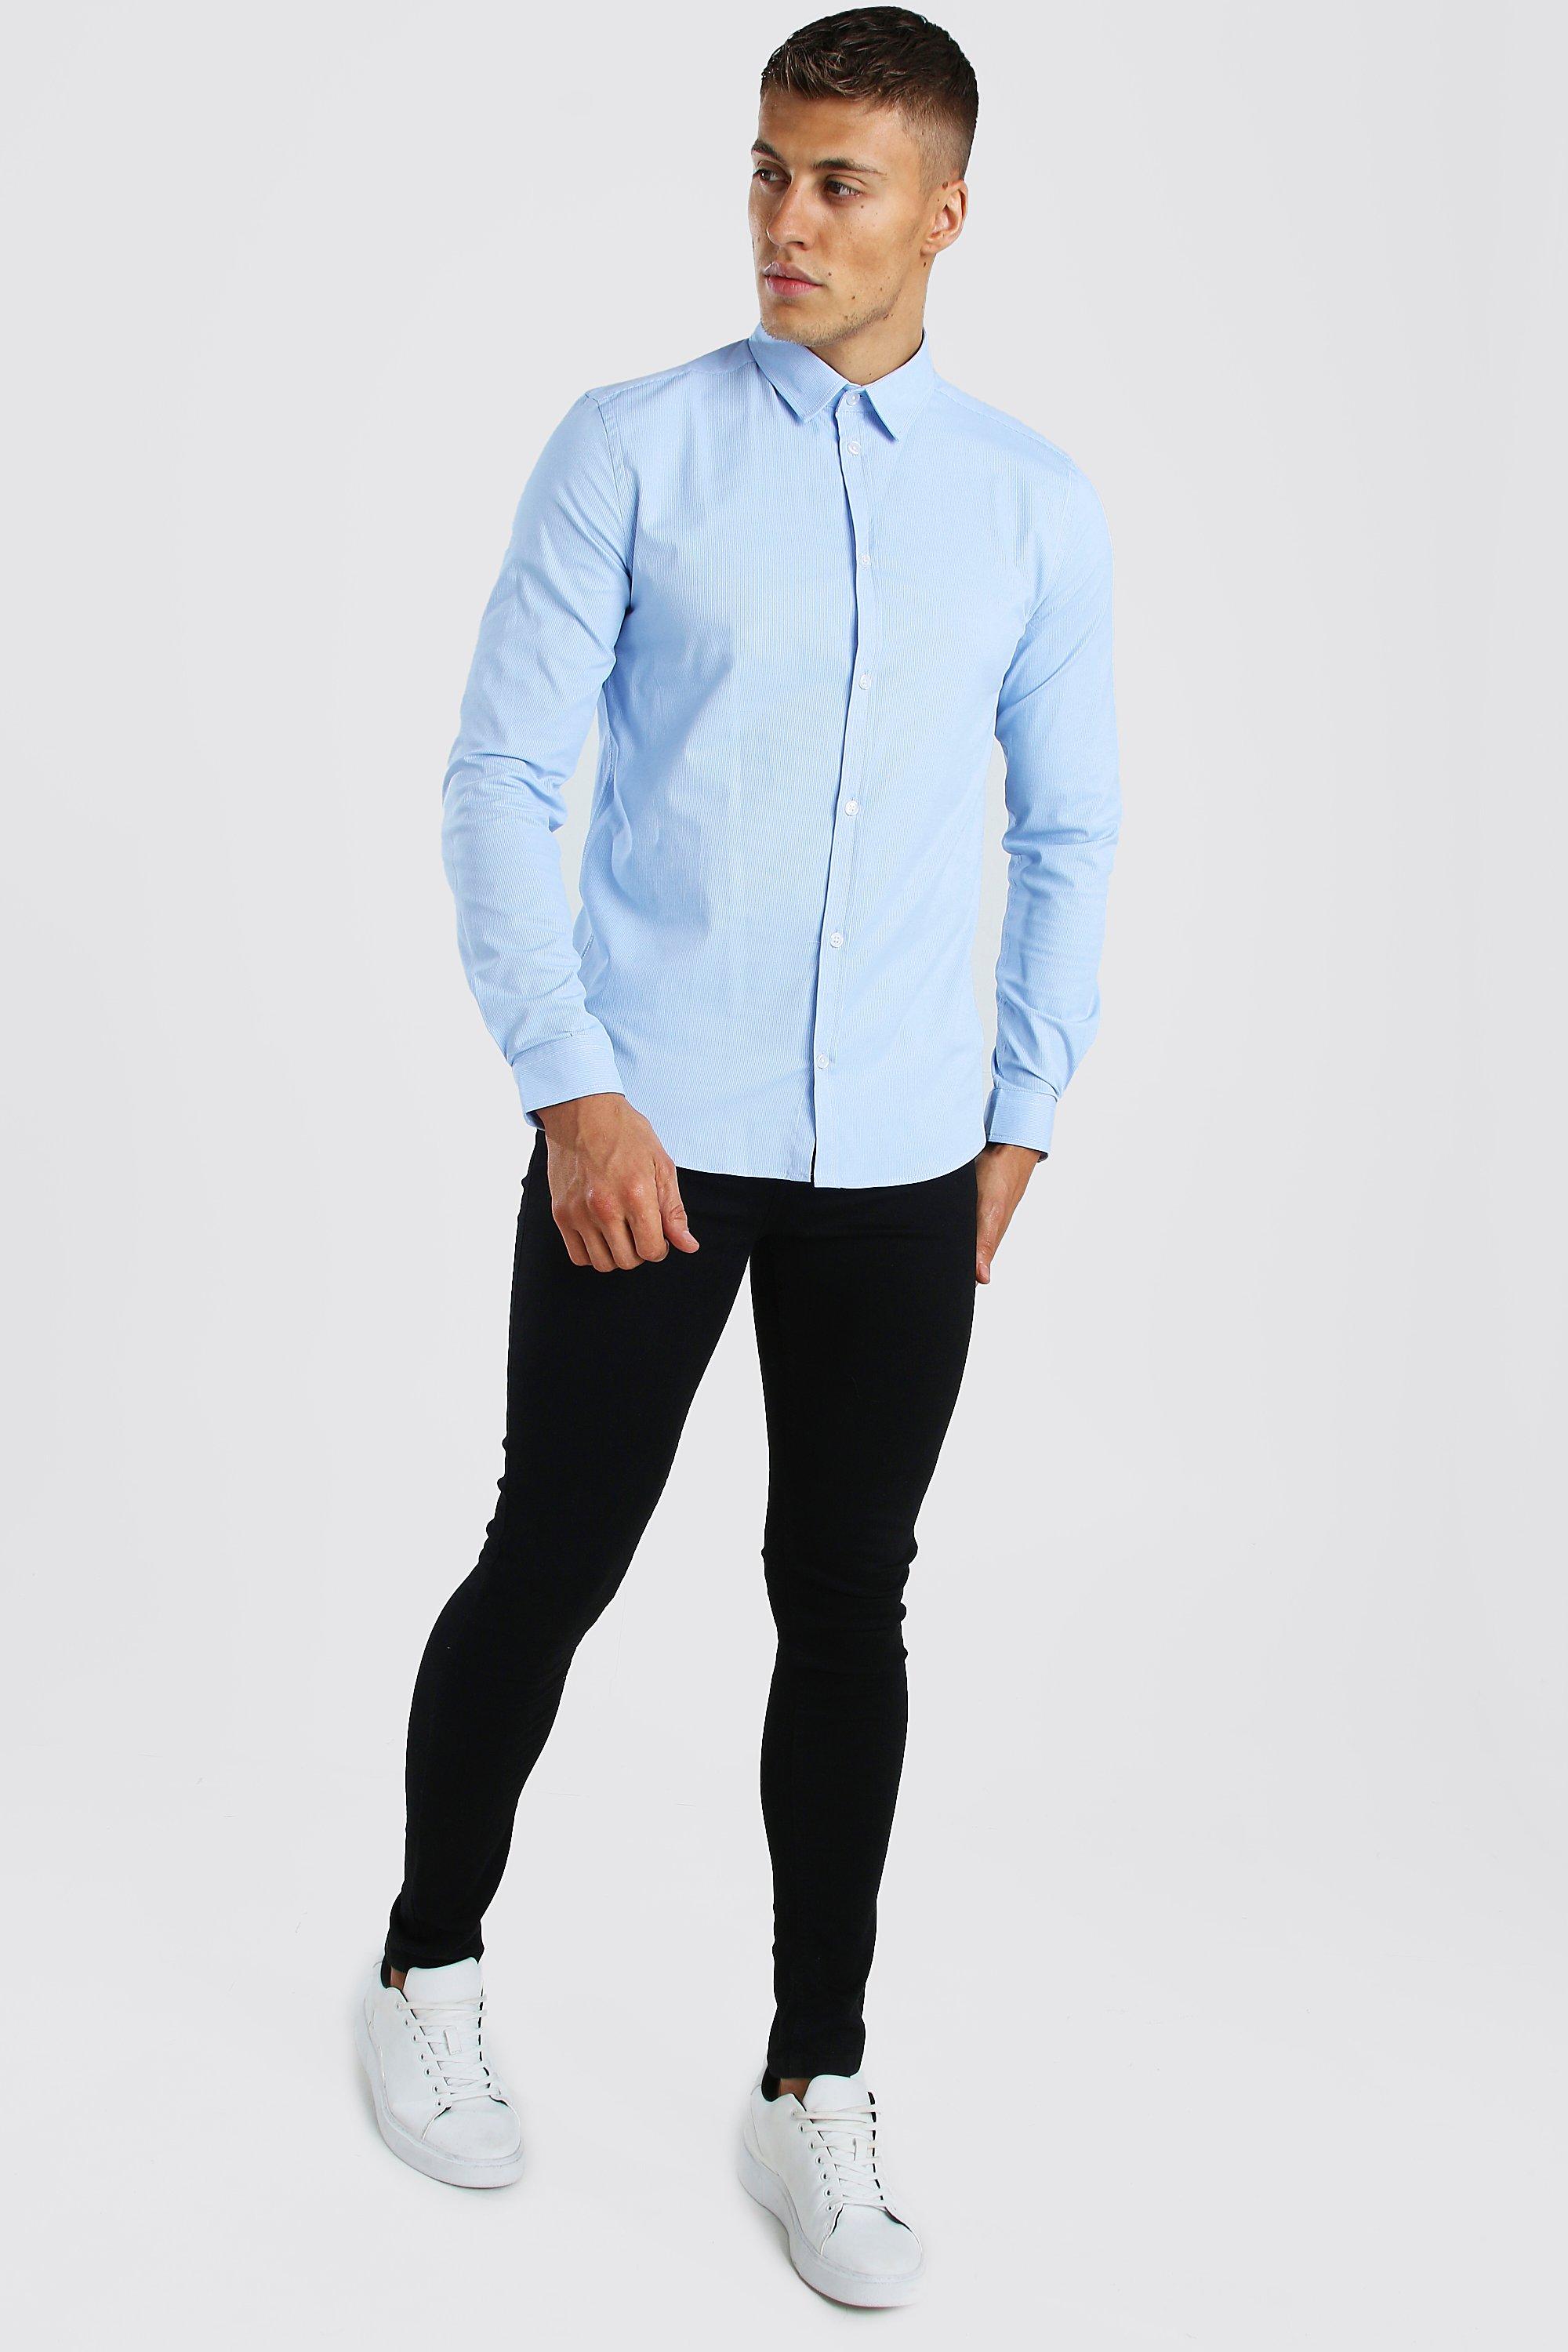 muscle fit formal shirts